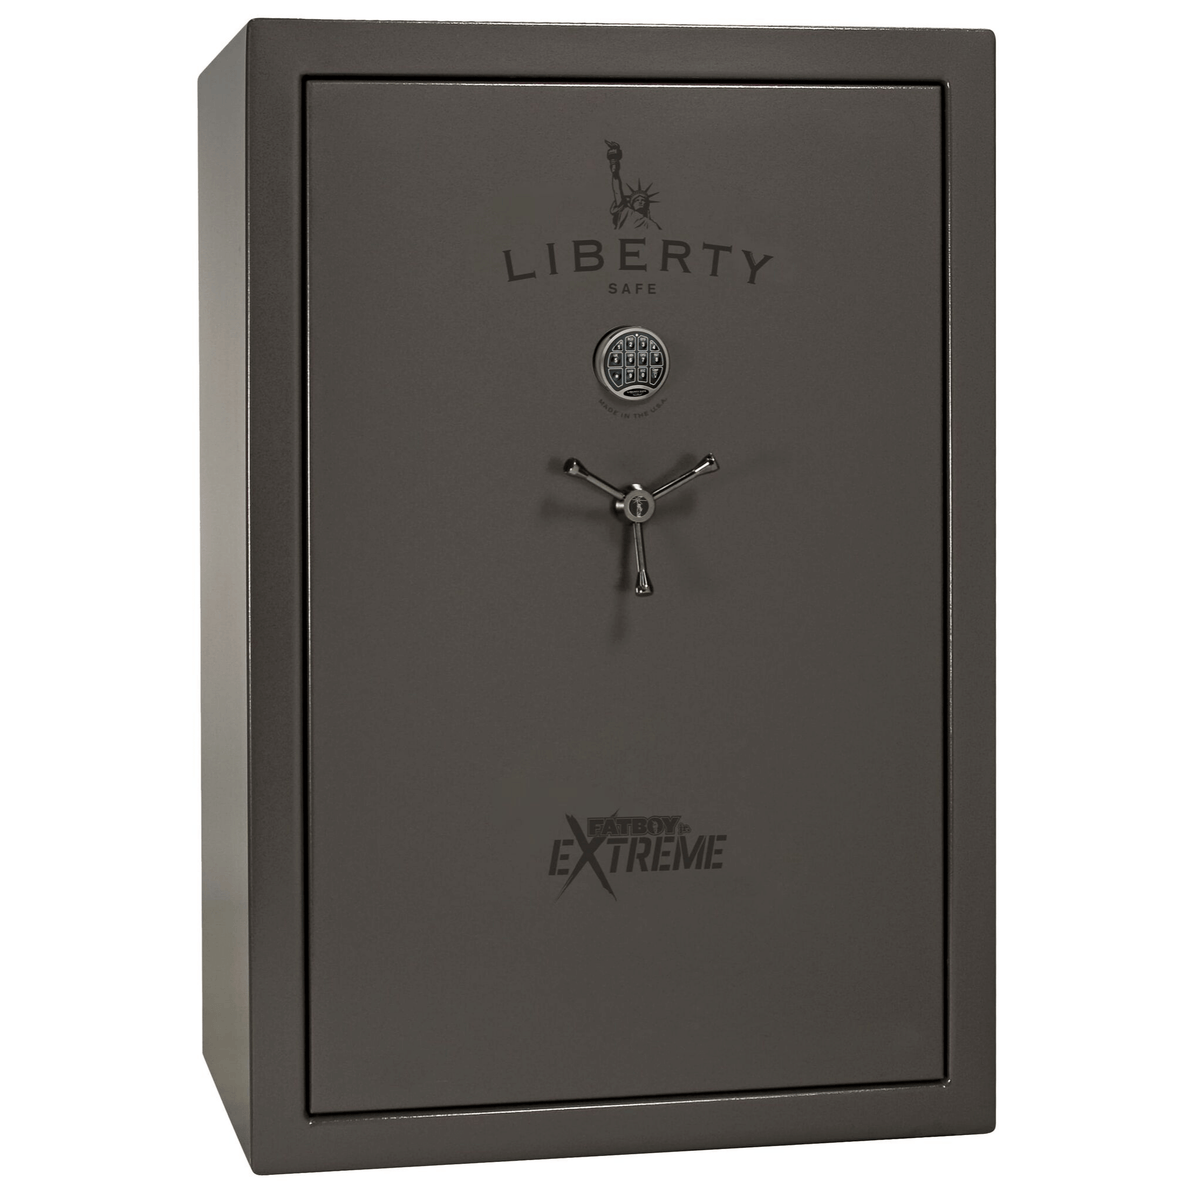 Fatboy Junior Extreme Safe in Gray Marble with Black Chrome Electronic Lock.